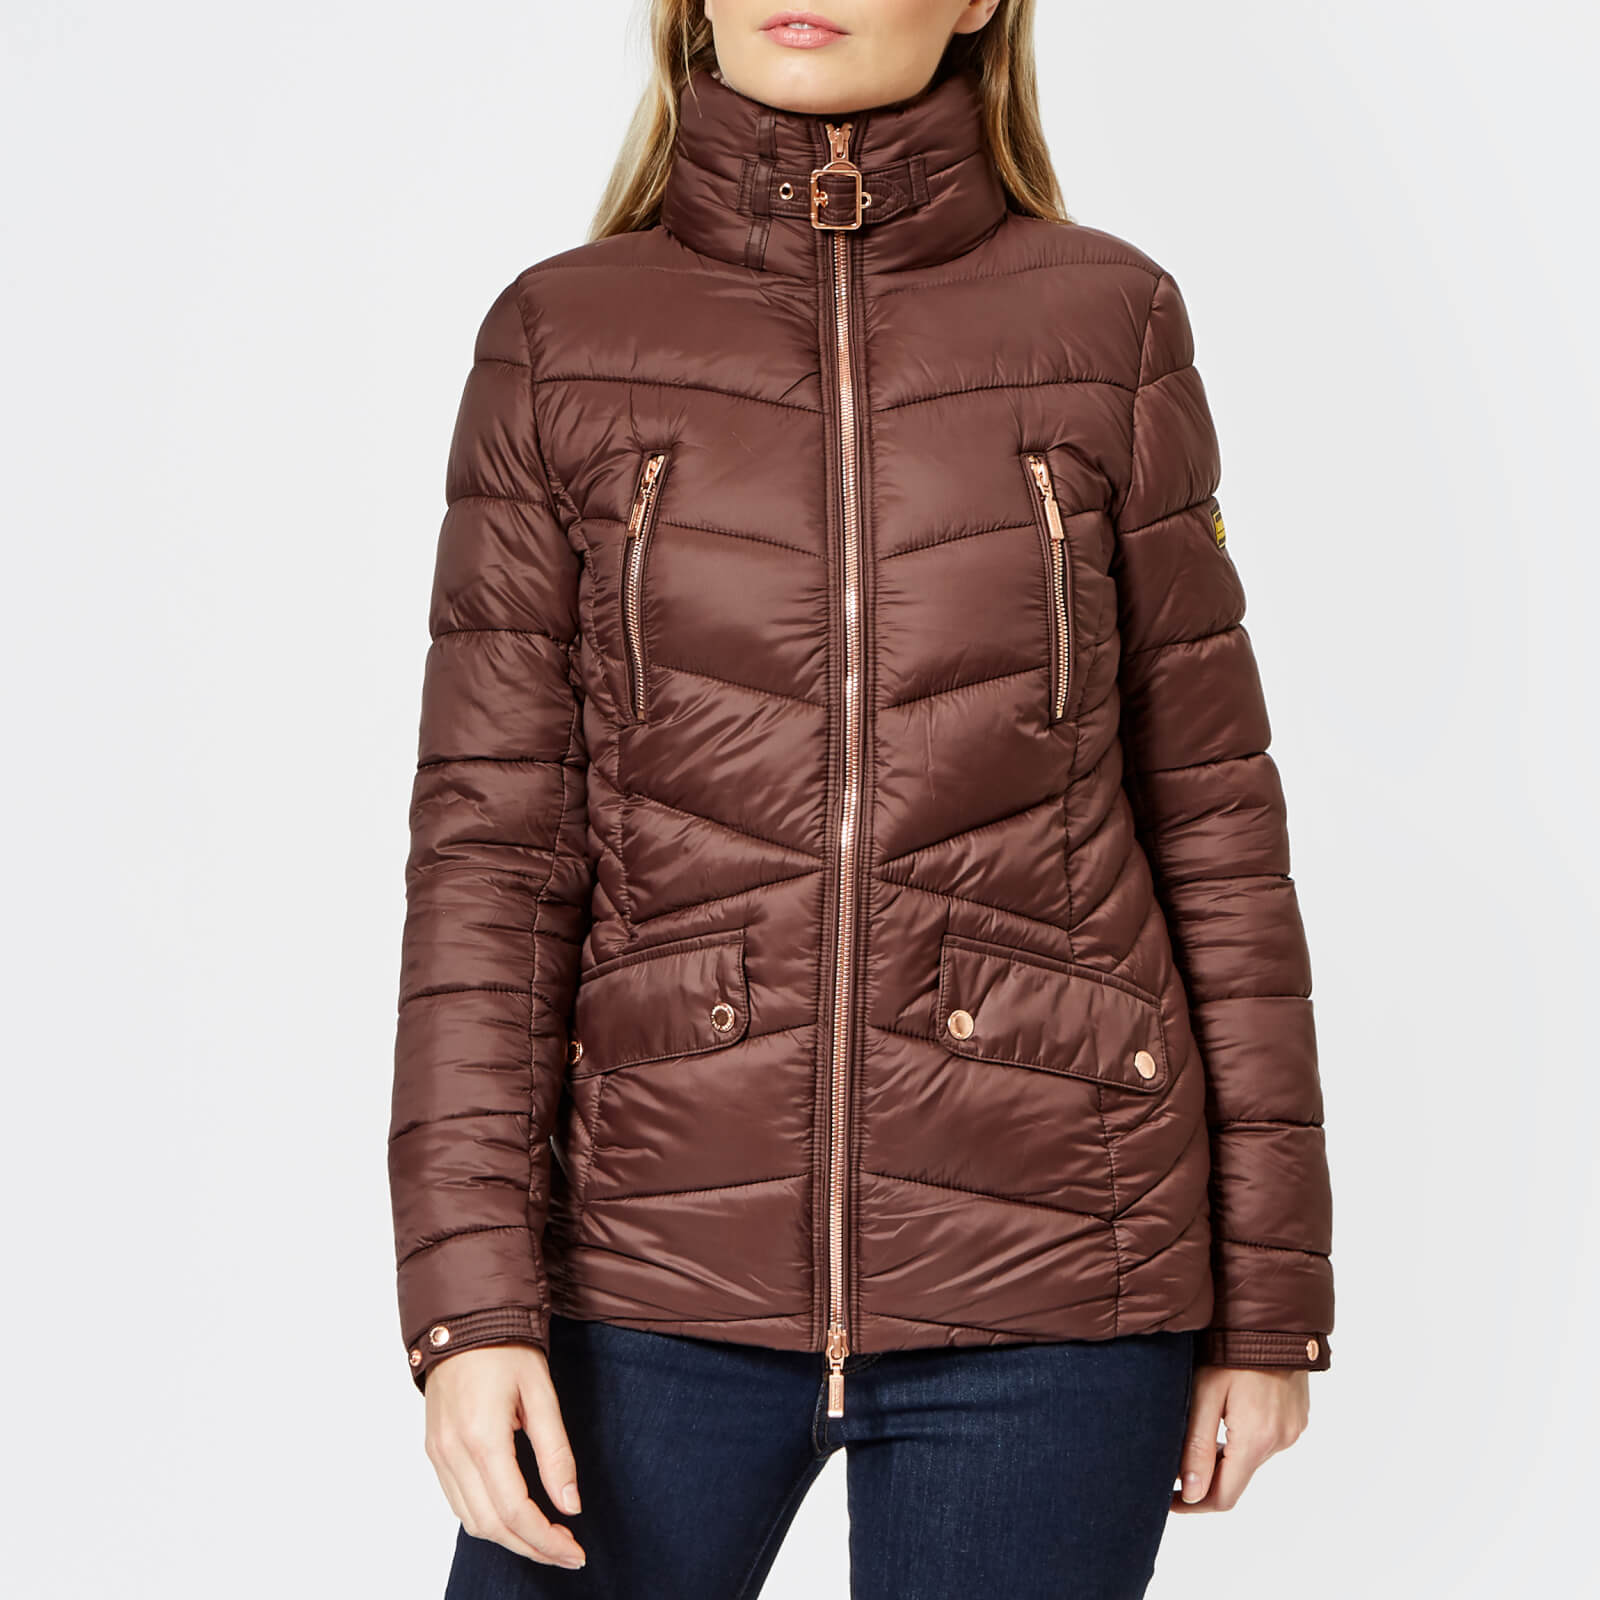 barbour autocross quilted jacket black